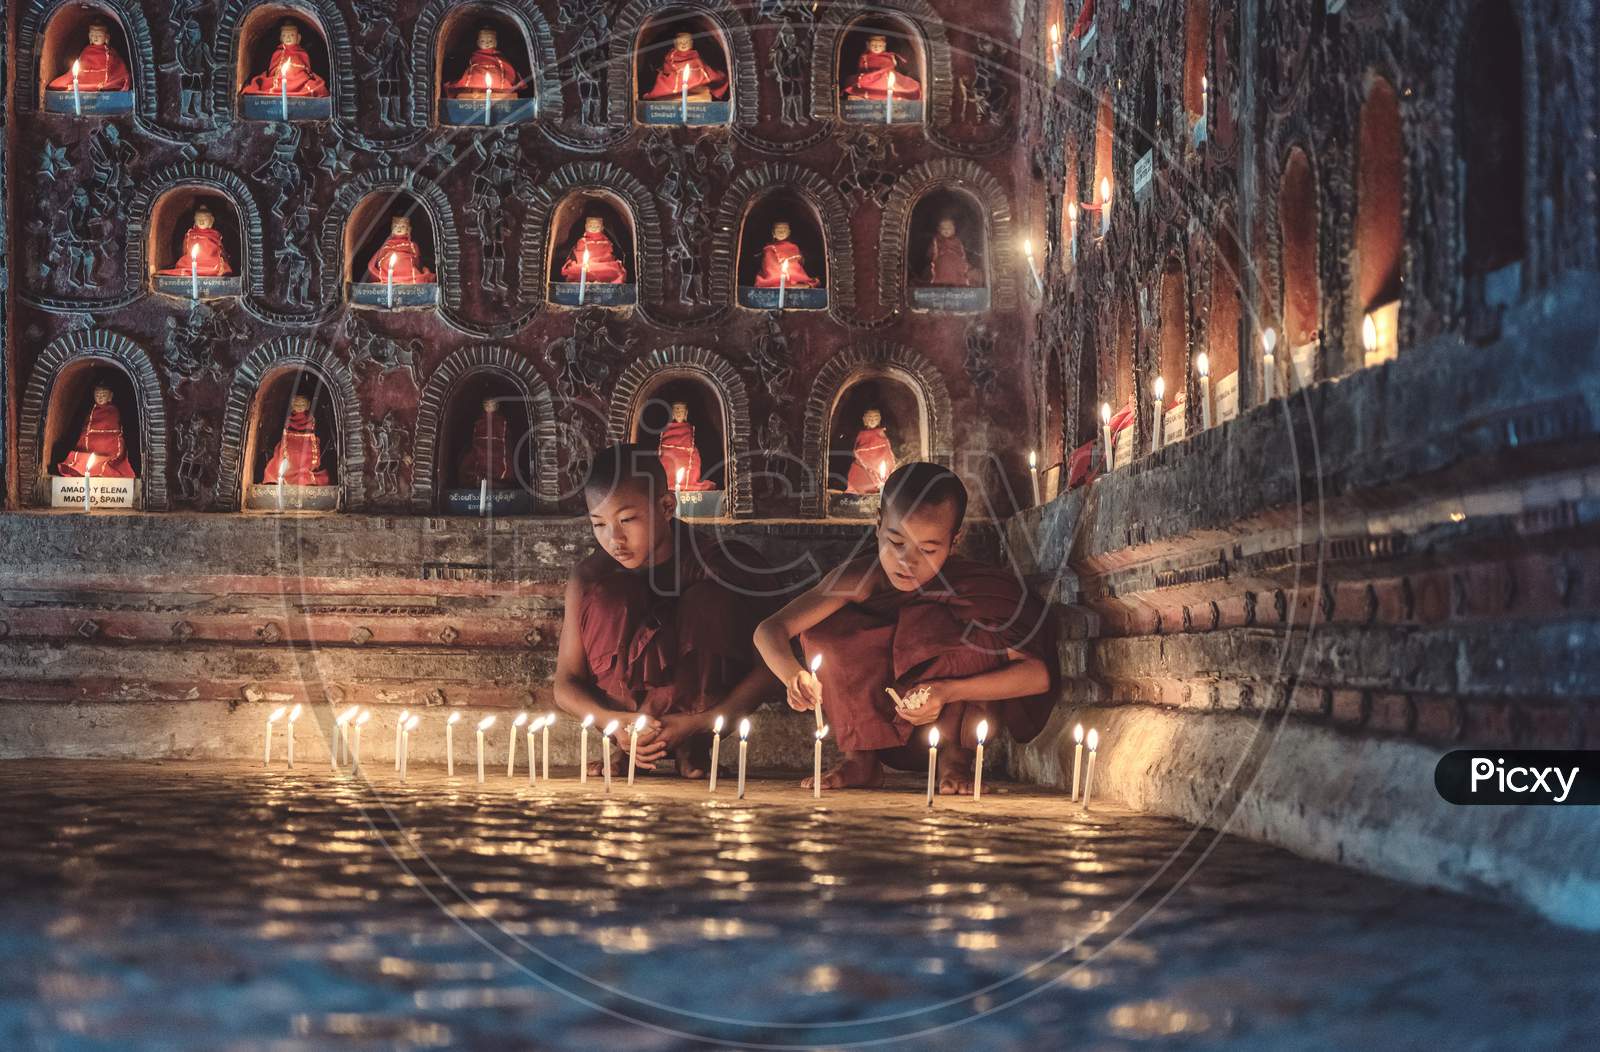 Young Novice Monks Lighting Up Candlelight Inside A Buddhist Temple, Low Light Setting, Shan State, Myanmar.